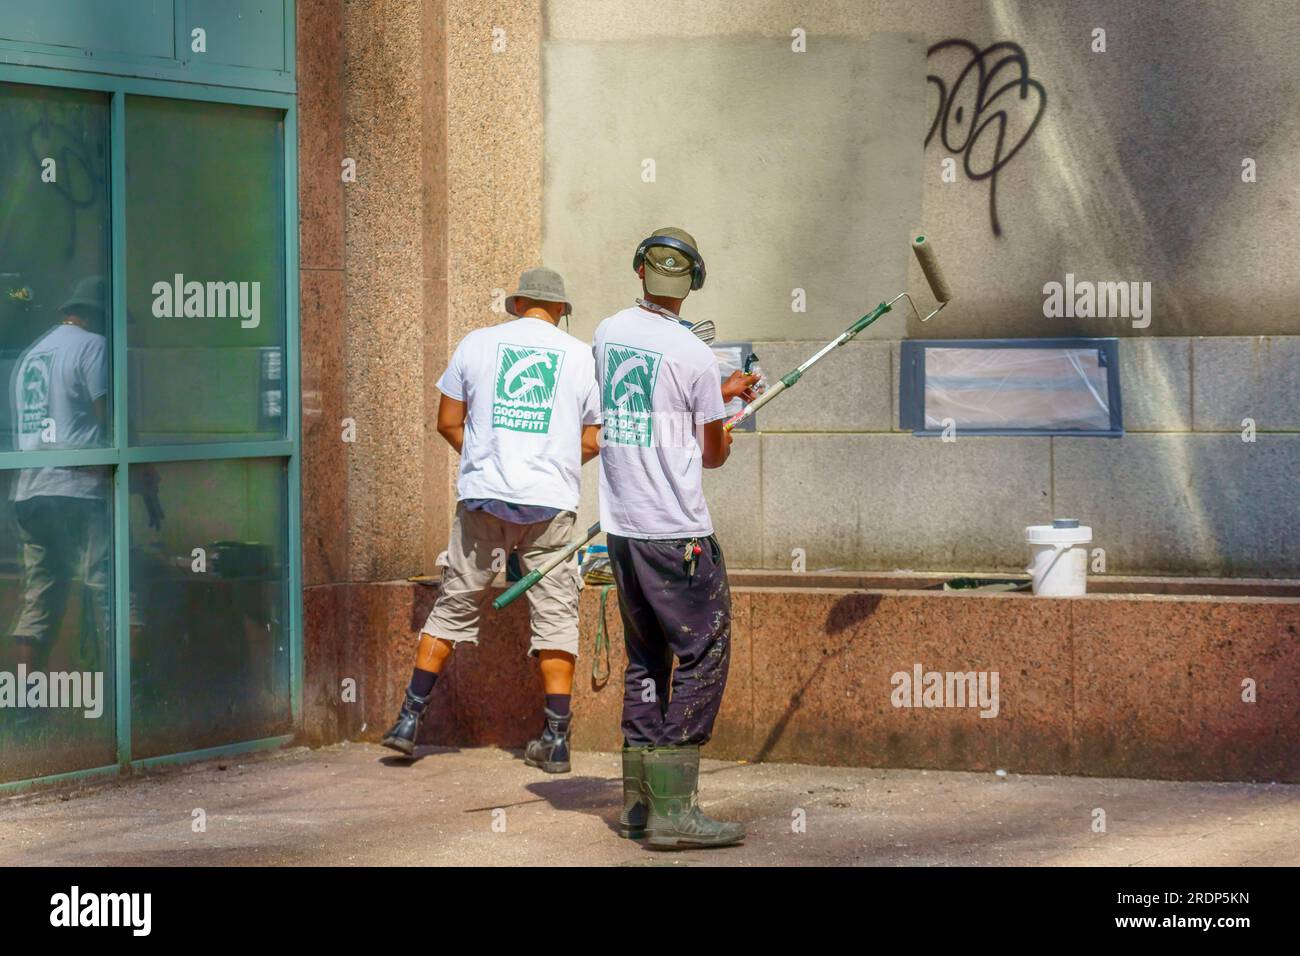 Toronto, Canada - July 19, 2023: Two men work erasing or deleting tagging graffiti from a building exterior wall in the downtwon district. Stock Photo